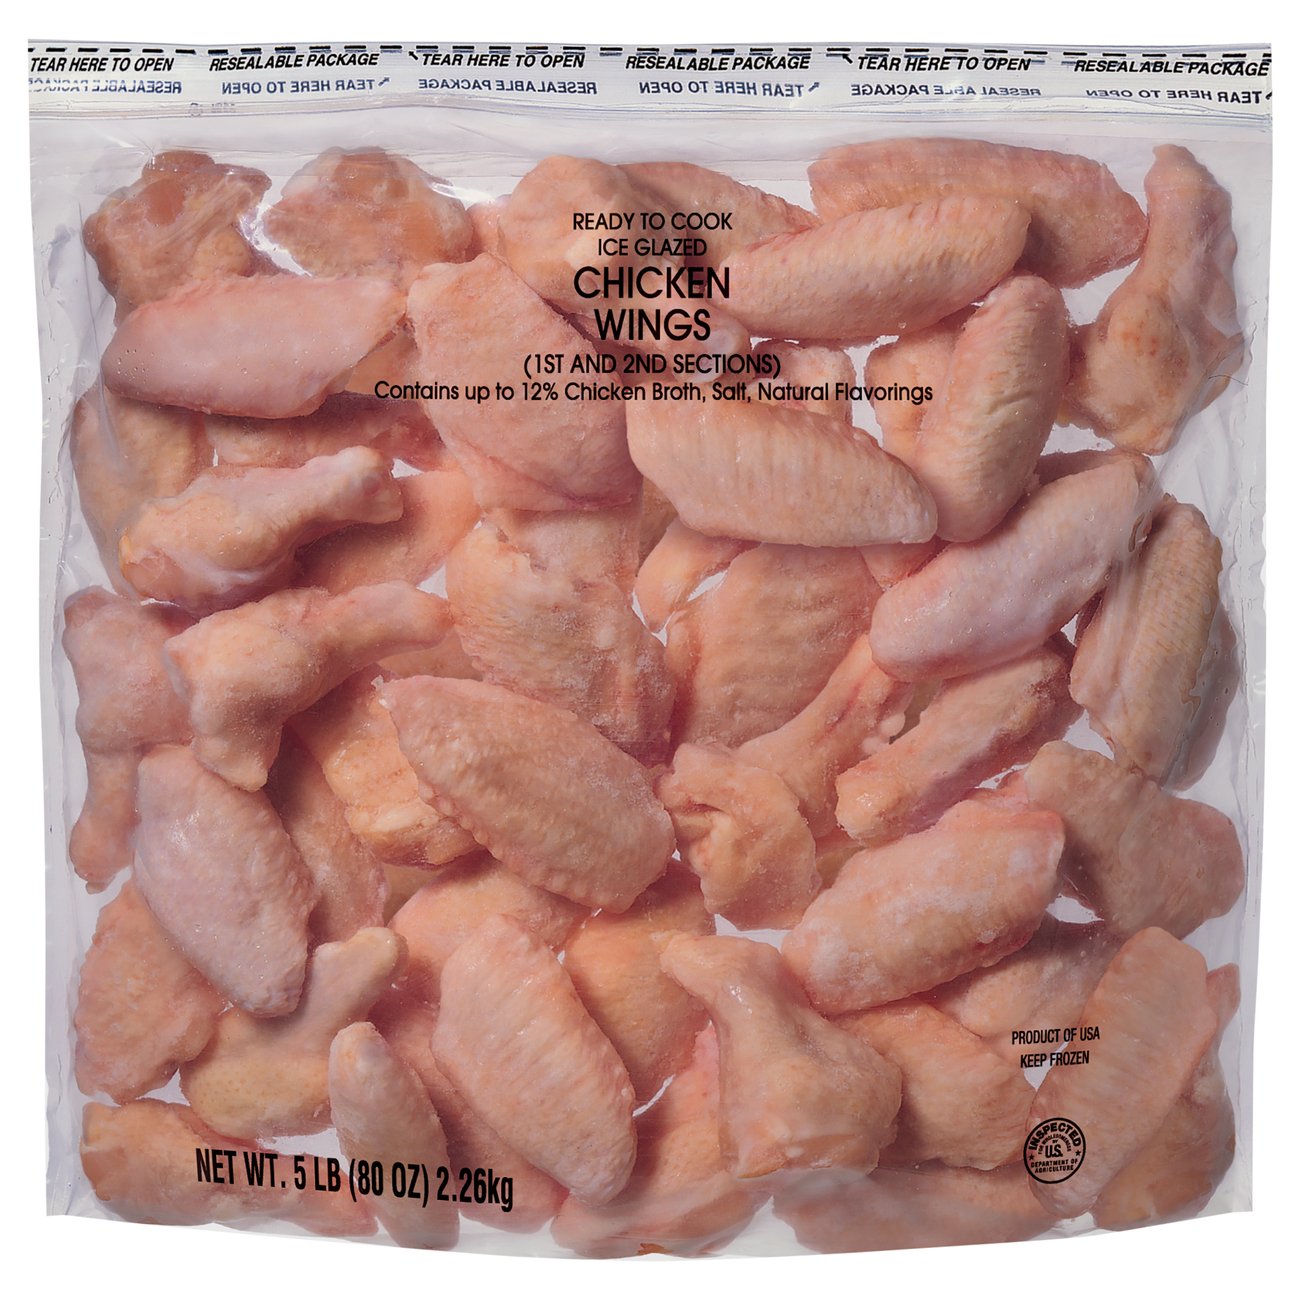 Individually Frozen Chicken Wing Sections - Koch Foods